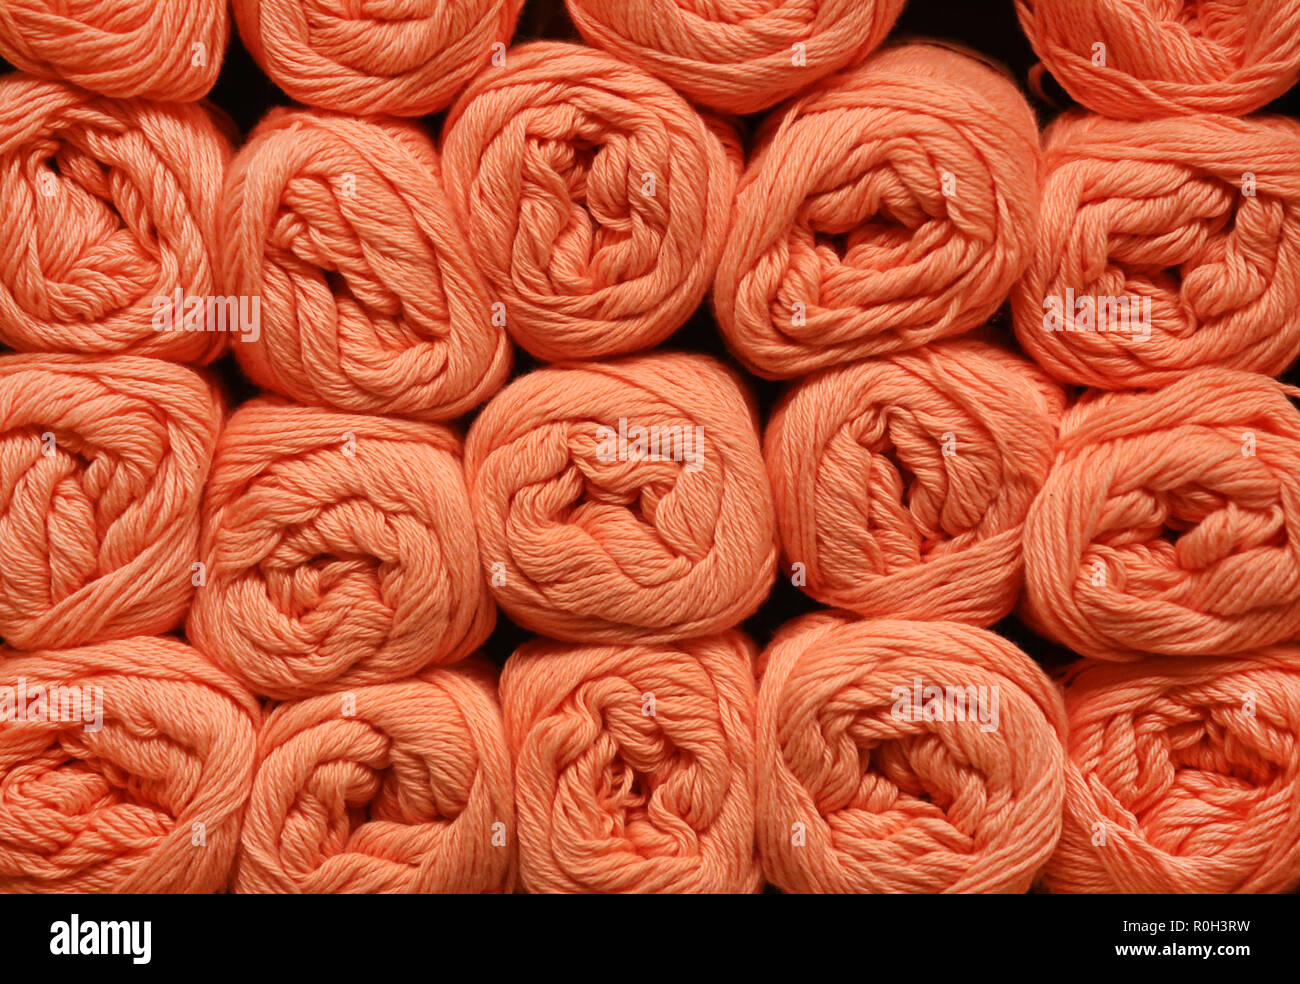 Wool rolls in a shelf as a background Stock Photo